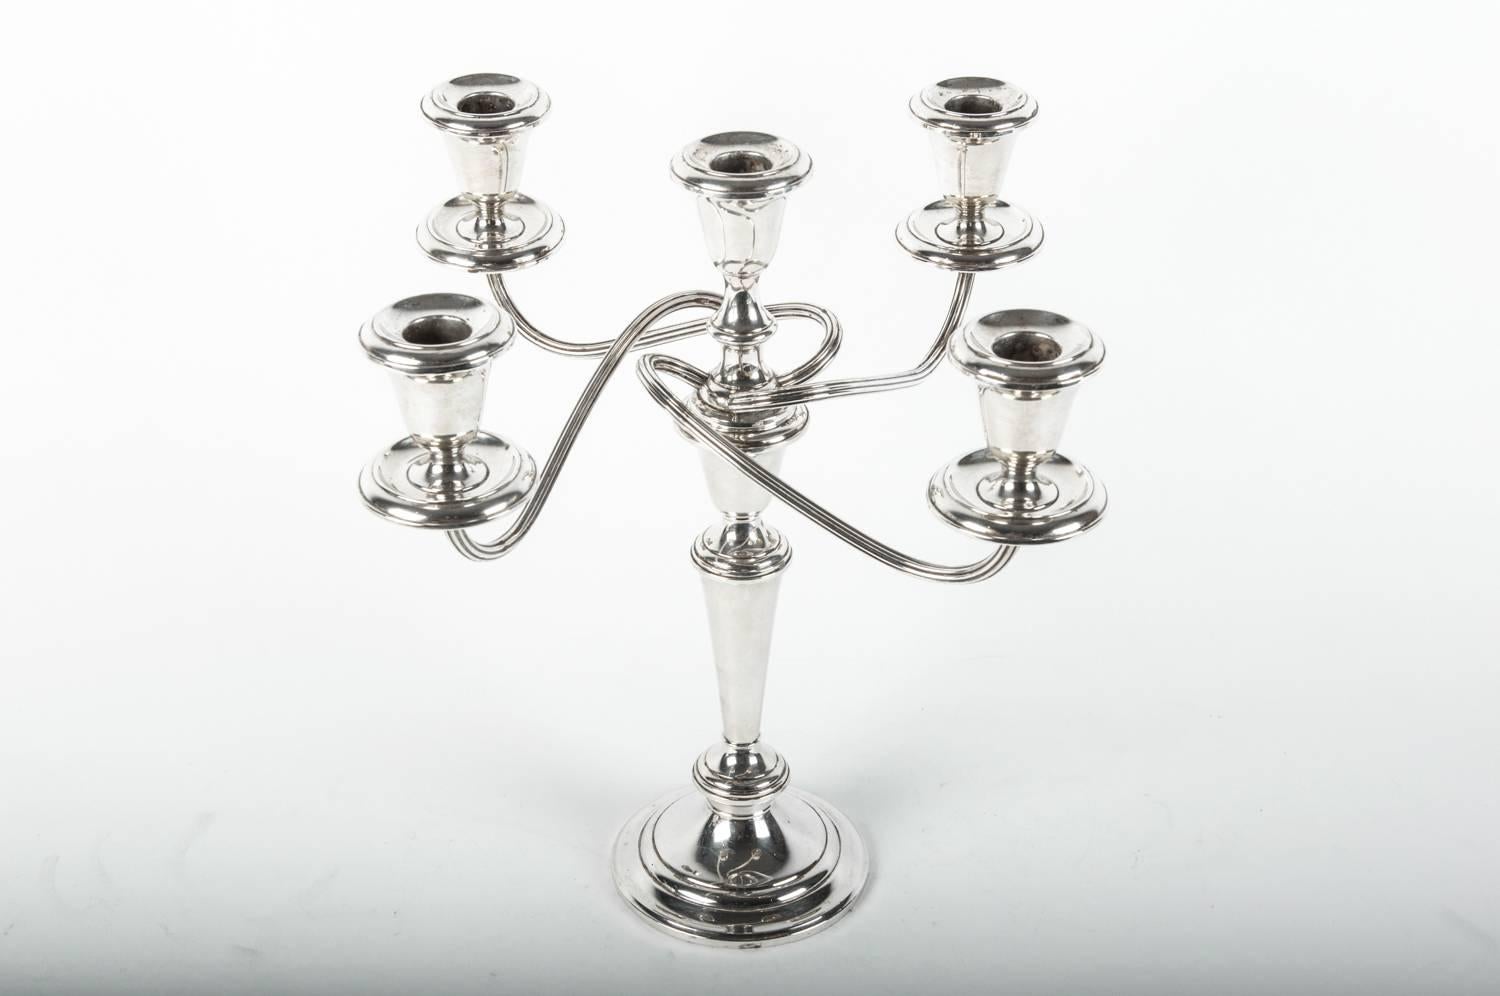 Vintage sterling silver five arms candelabra. Also can be use as a single candlestick. The candelabra is in excellent vintage condition , maker's mark undersigned . The candelabra measure 13 inches high x 13 inches top diameter.